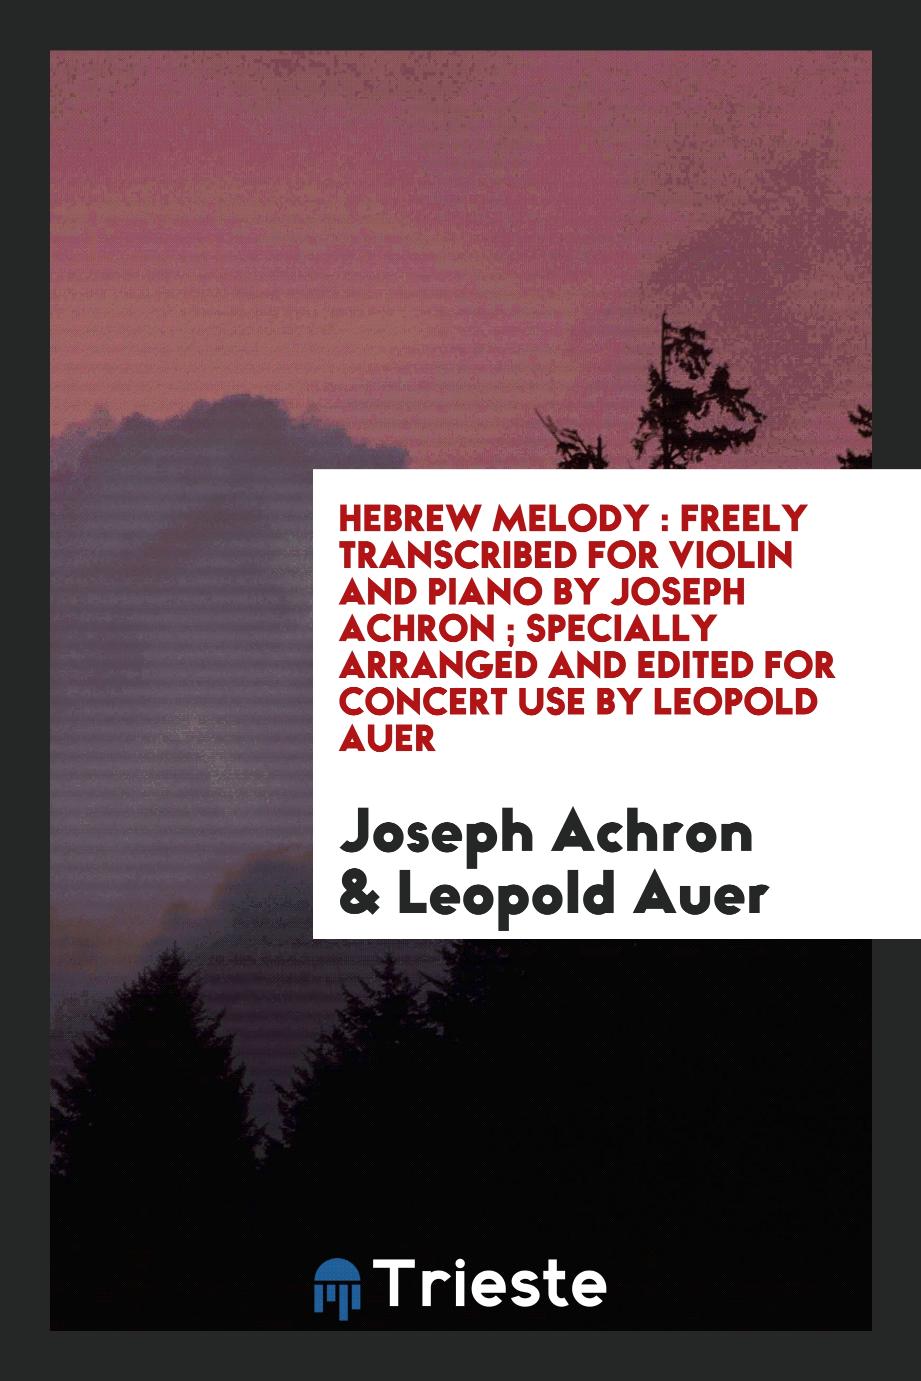 Hebrew melody : freely transcribed for violin and piano by Joseph Achron ; specially arranged and edited for concert use by Leopold Auer